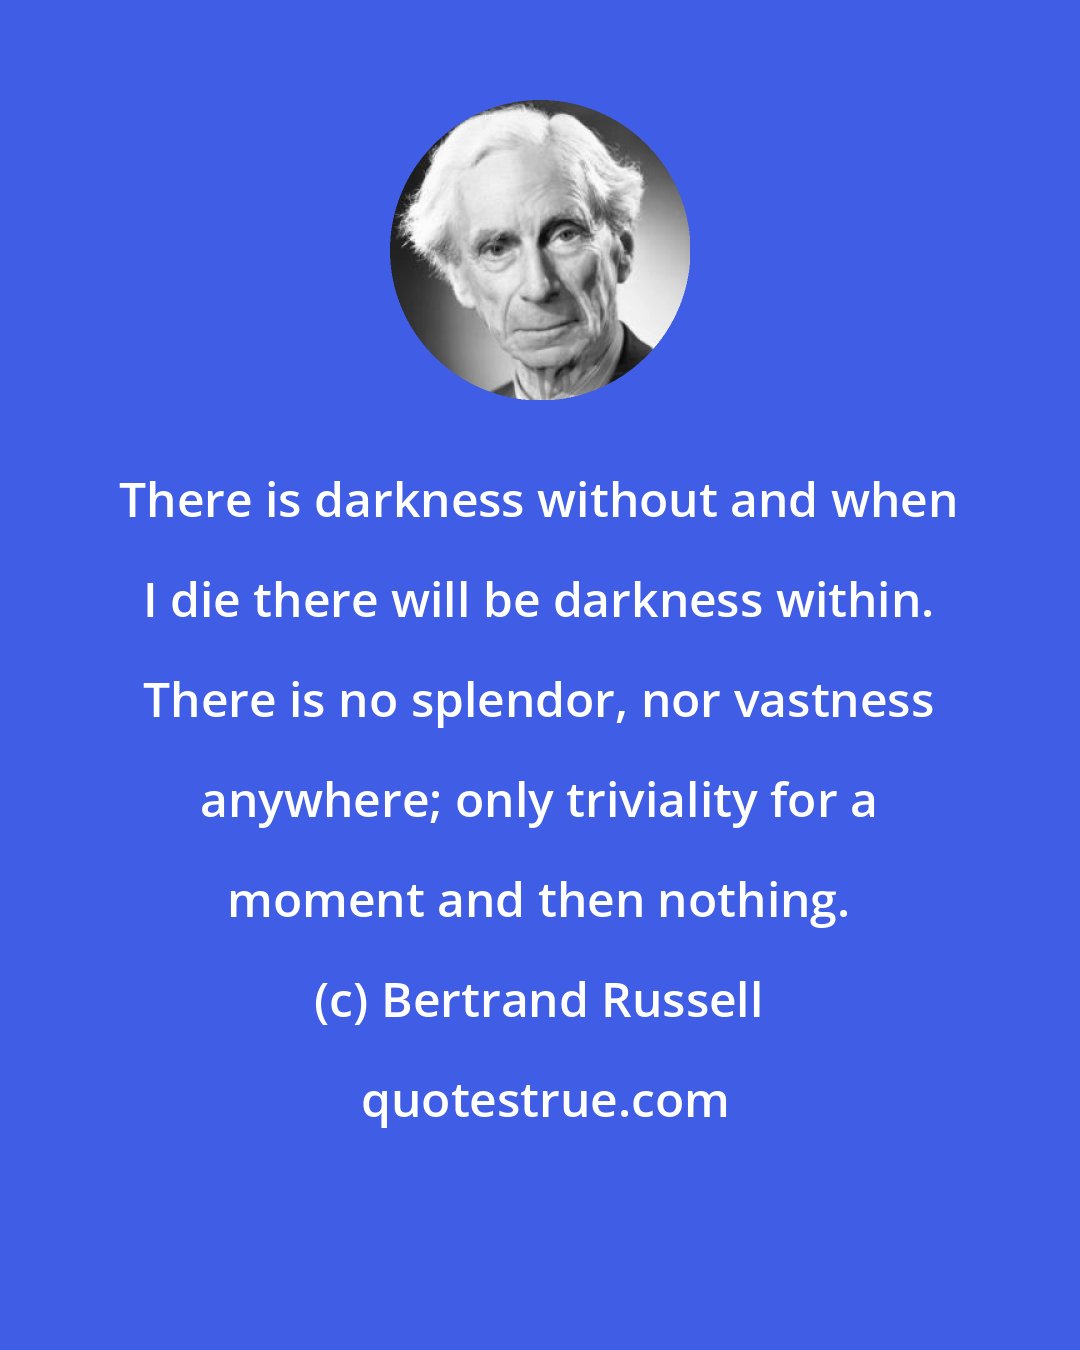 Bertrand Russell: There is darkness without and when I die there will be darkness within. There is no splendor, nor vastness anywhere; only triviality for a moment and then nothing.